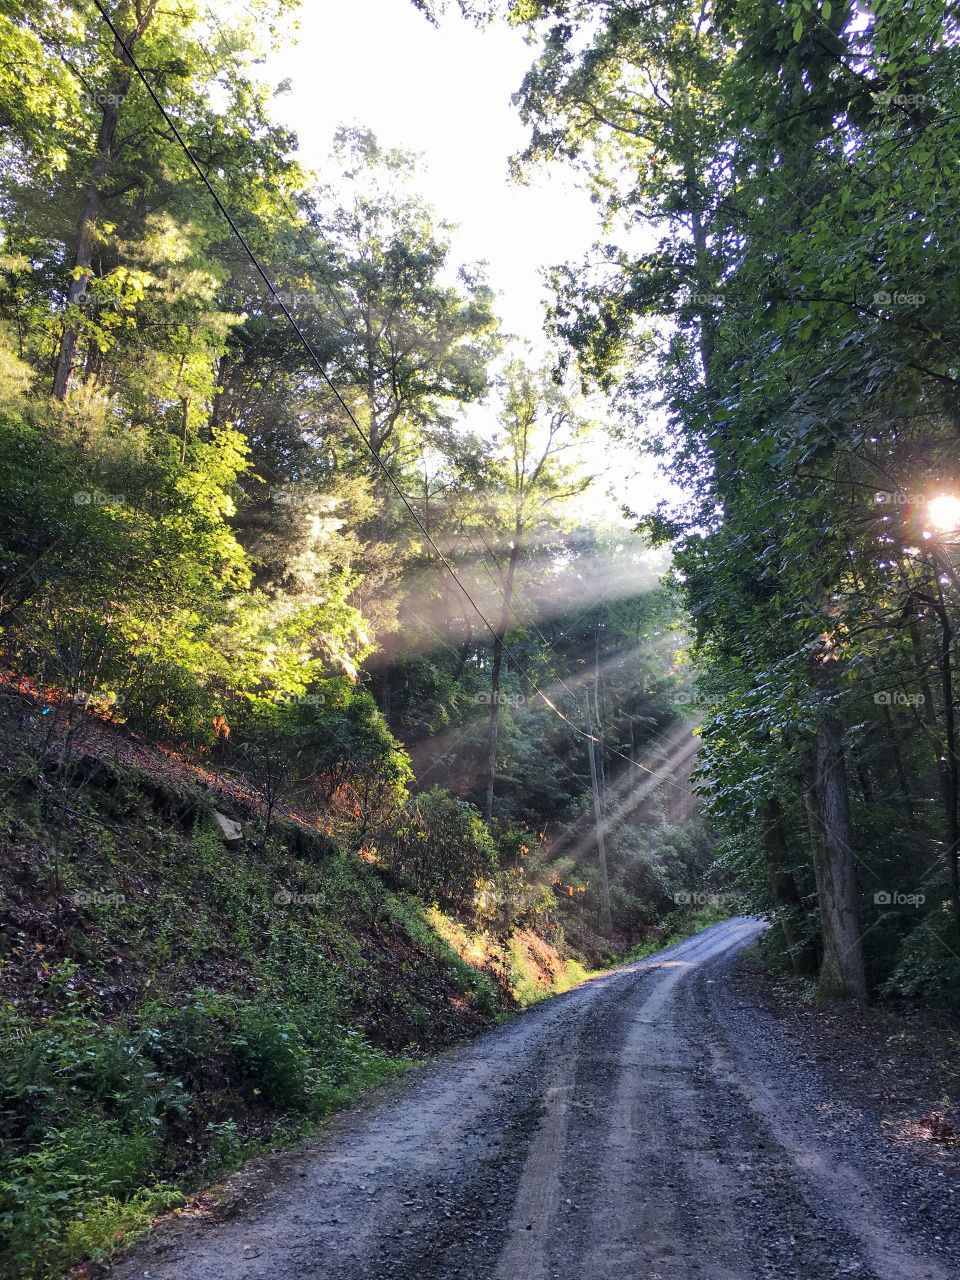 Sun streaks through spring foliage on a dirt mountain road in a forest. 